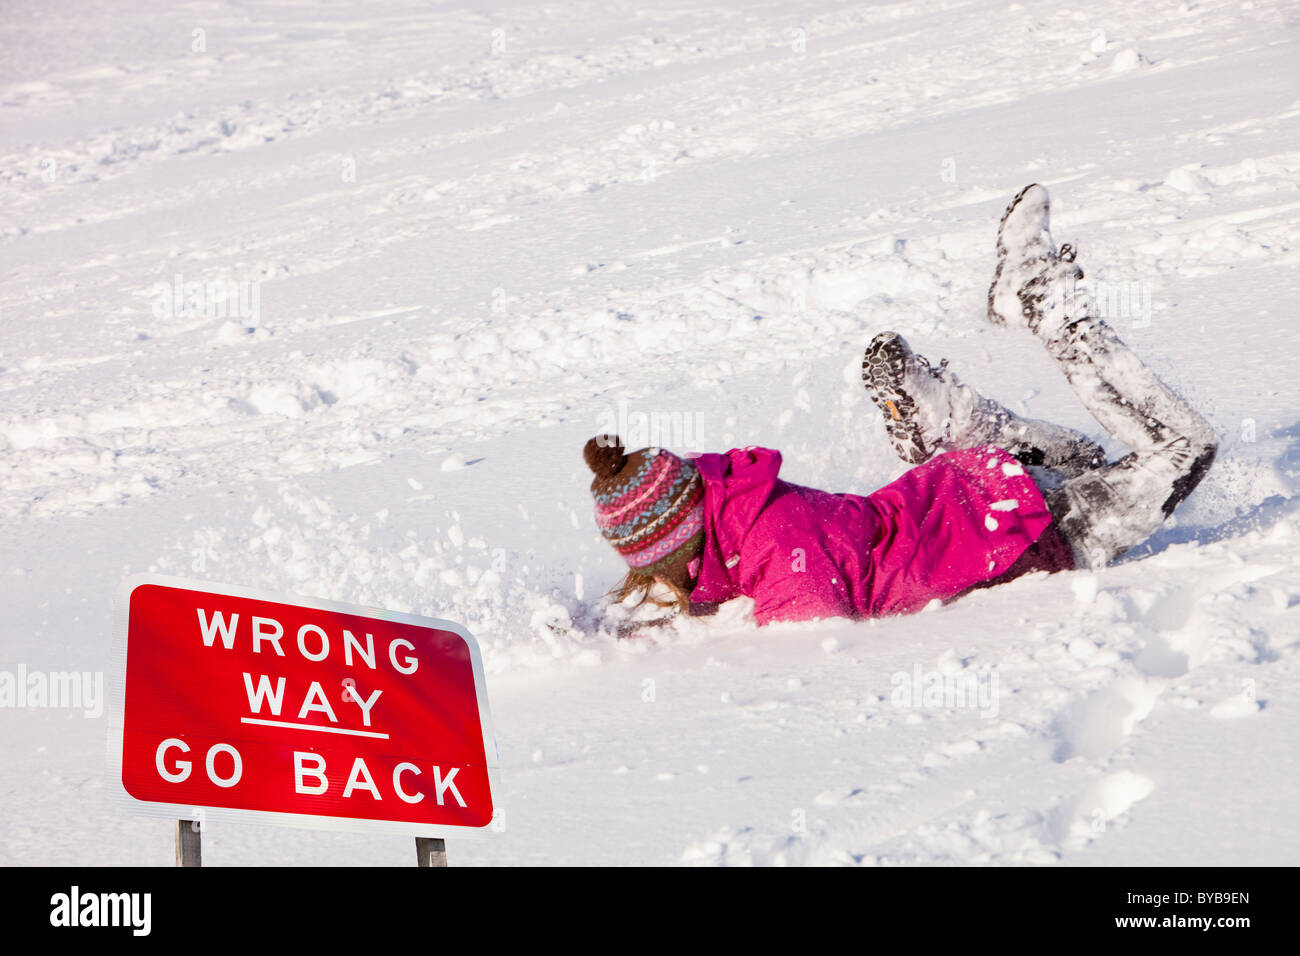 A young girl tripping up in the snow, Settle, Yorkshire Dales, UK. Stock Photo